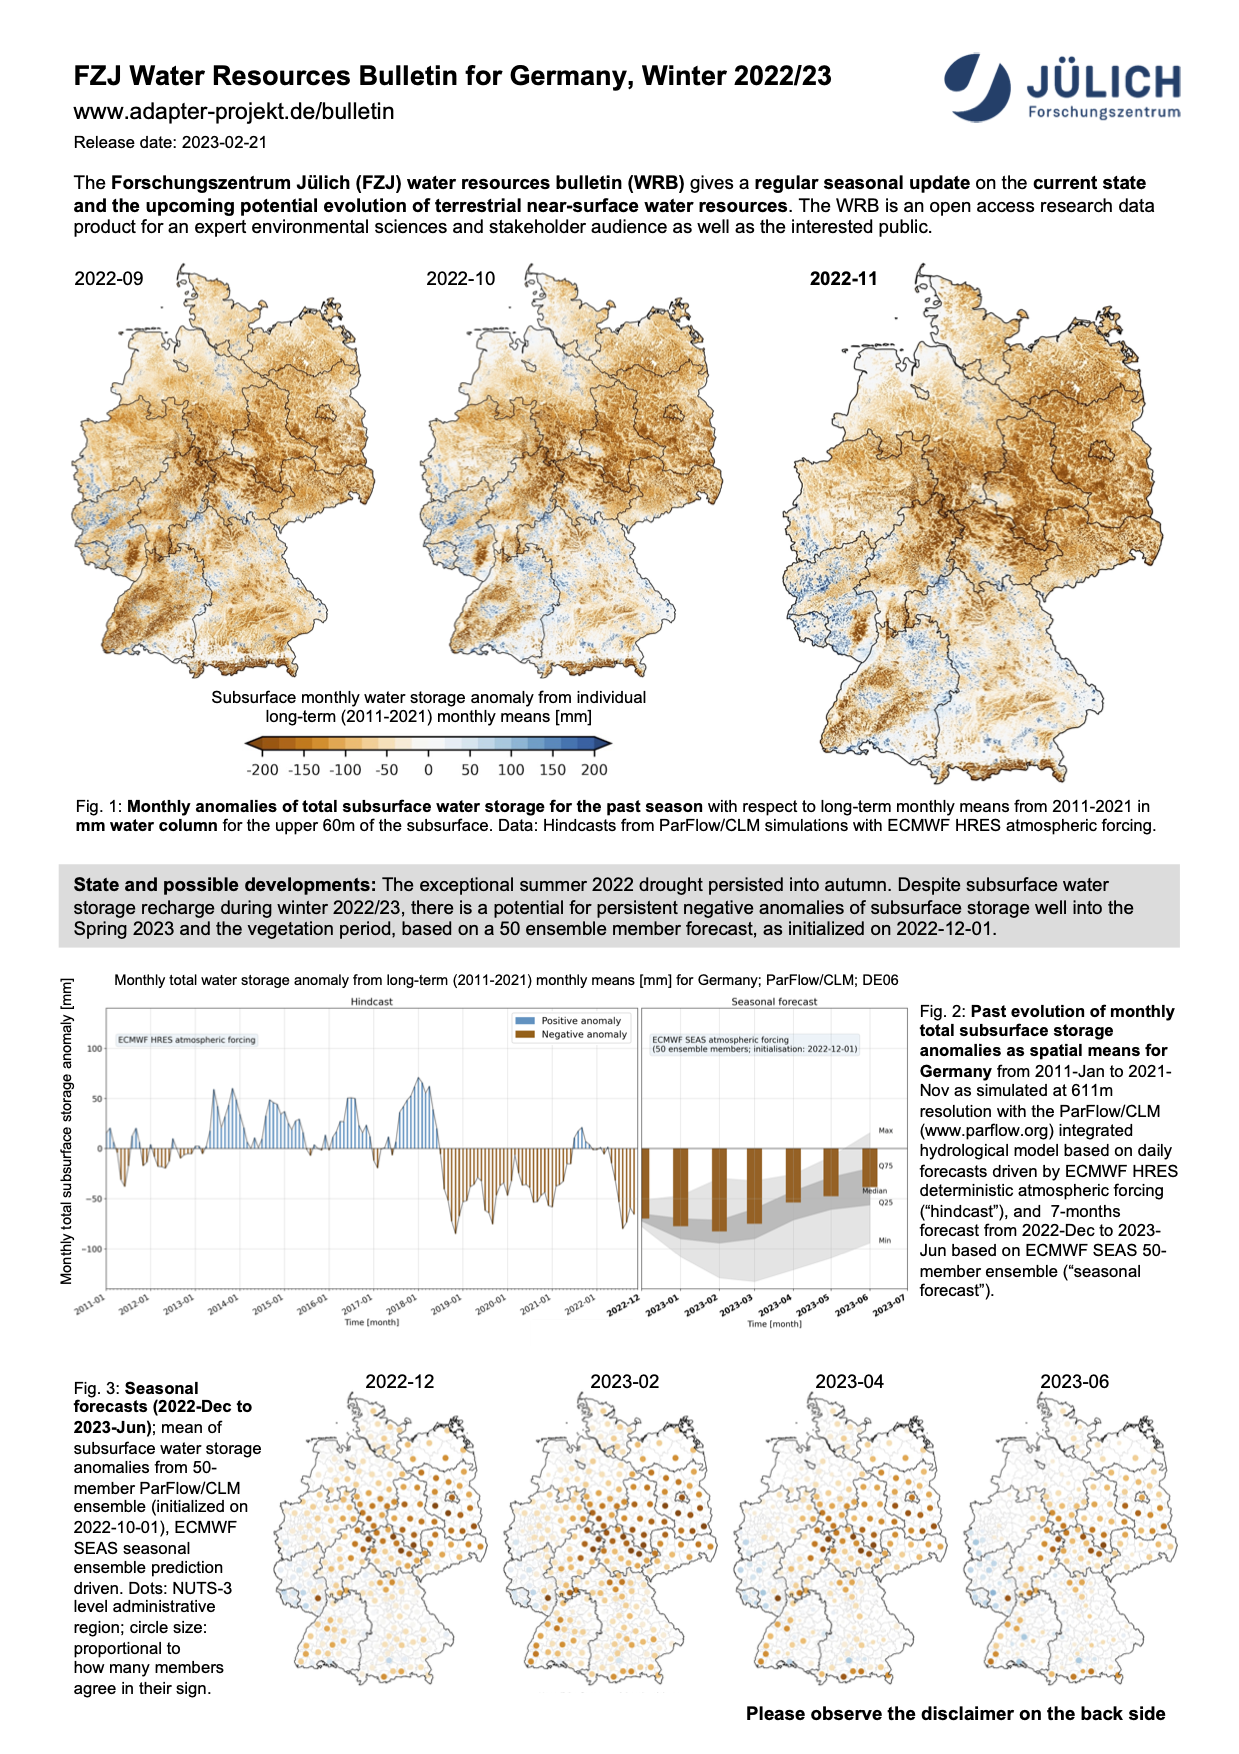 FZJ Water Resources Bulletin for Germany Winter 2022-23